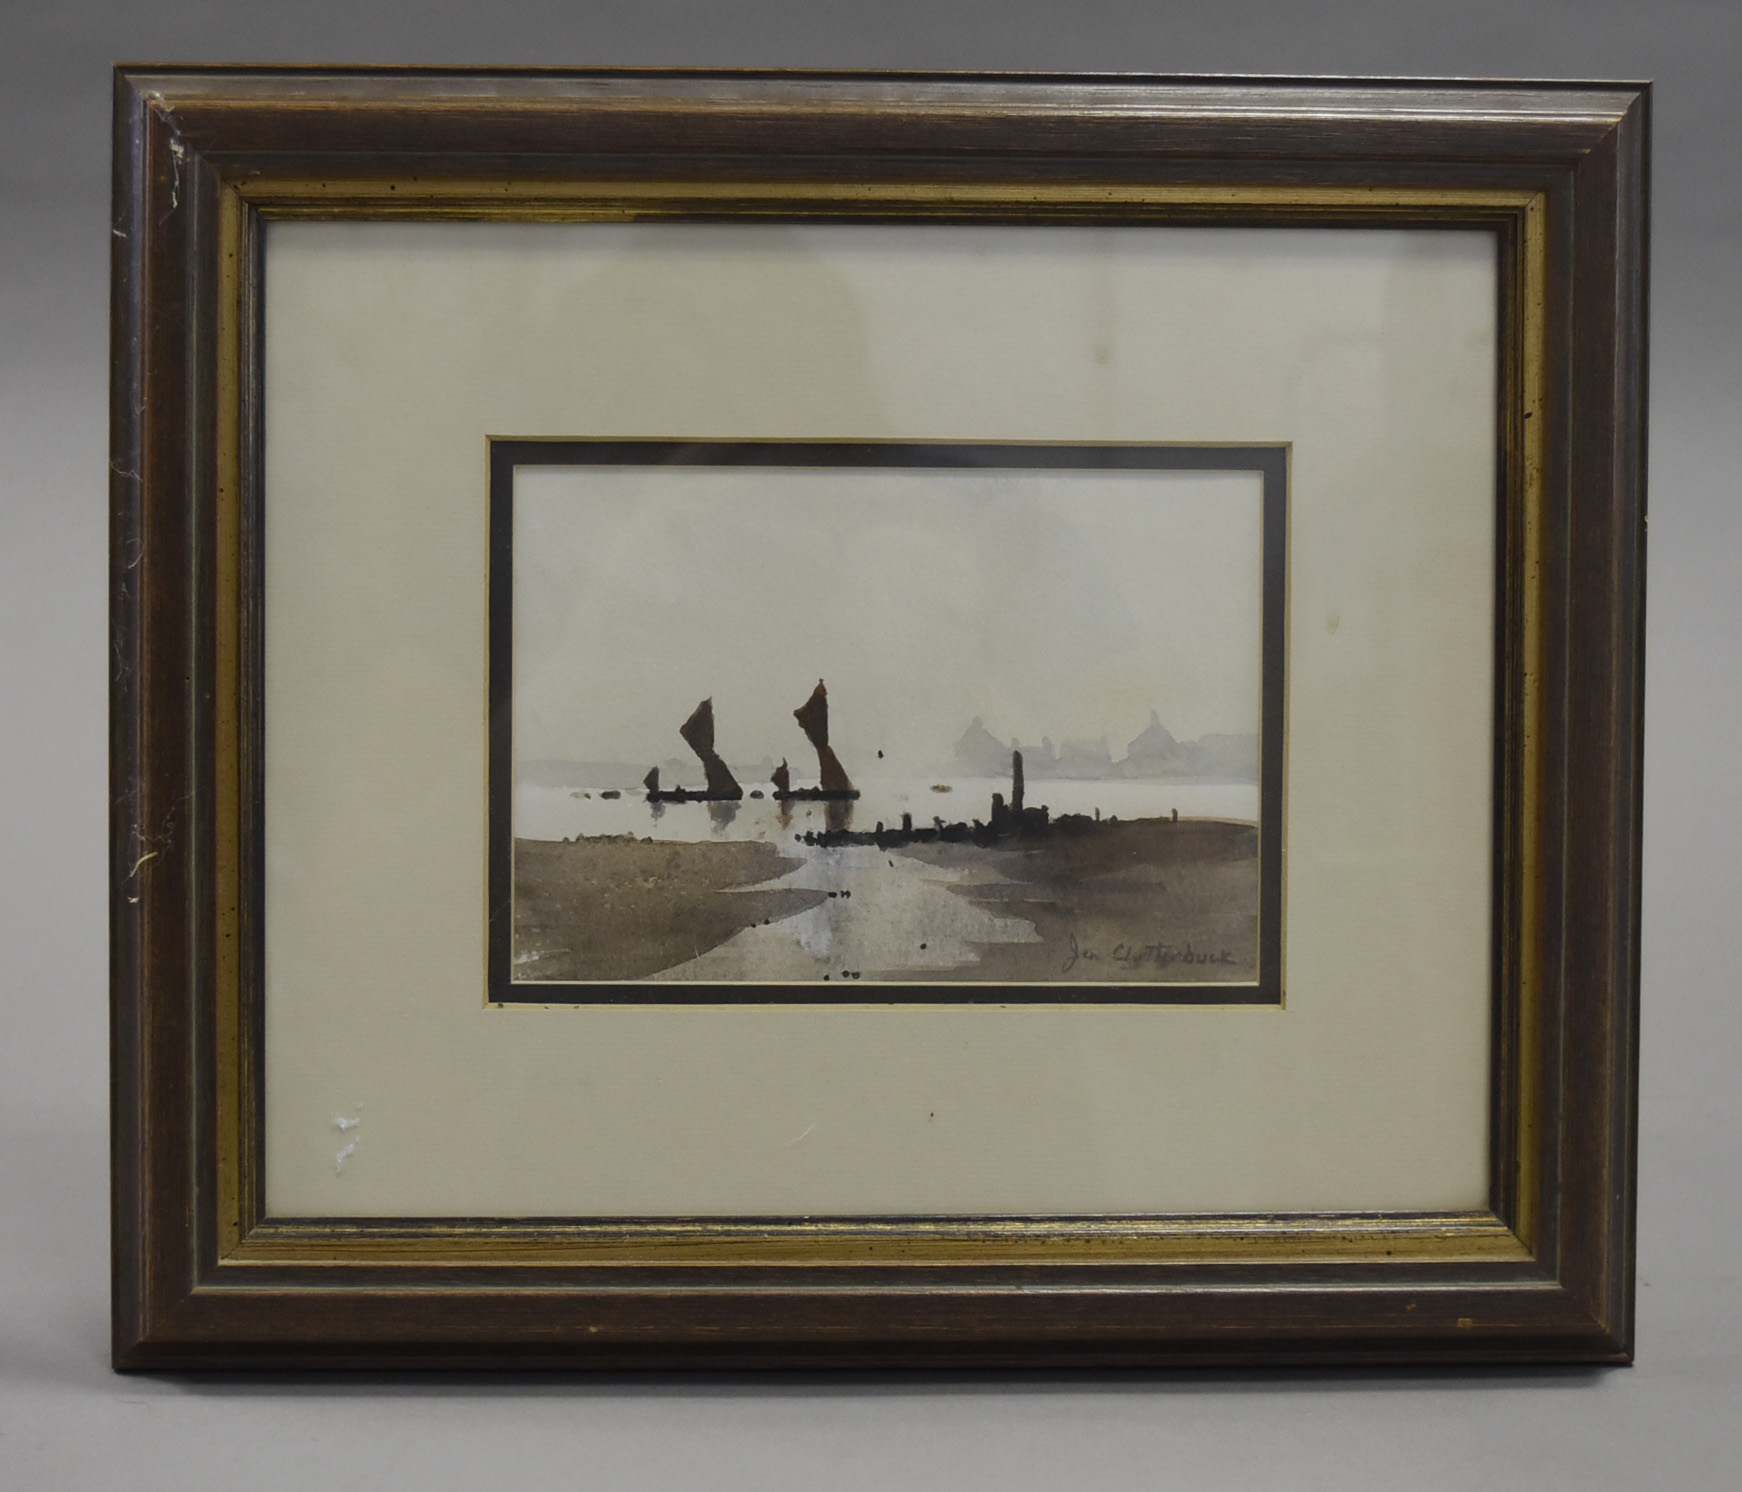 J. Clutterbuck (20th Century) watercolour on paper, The Fens', signed 'Jn Clutterbuck', 17.5 cm x - Image 3 of 3